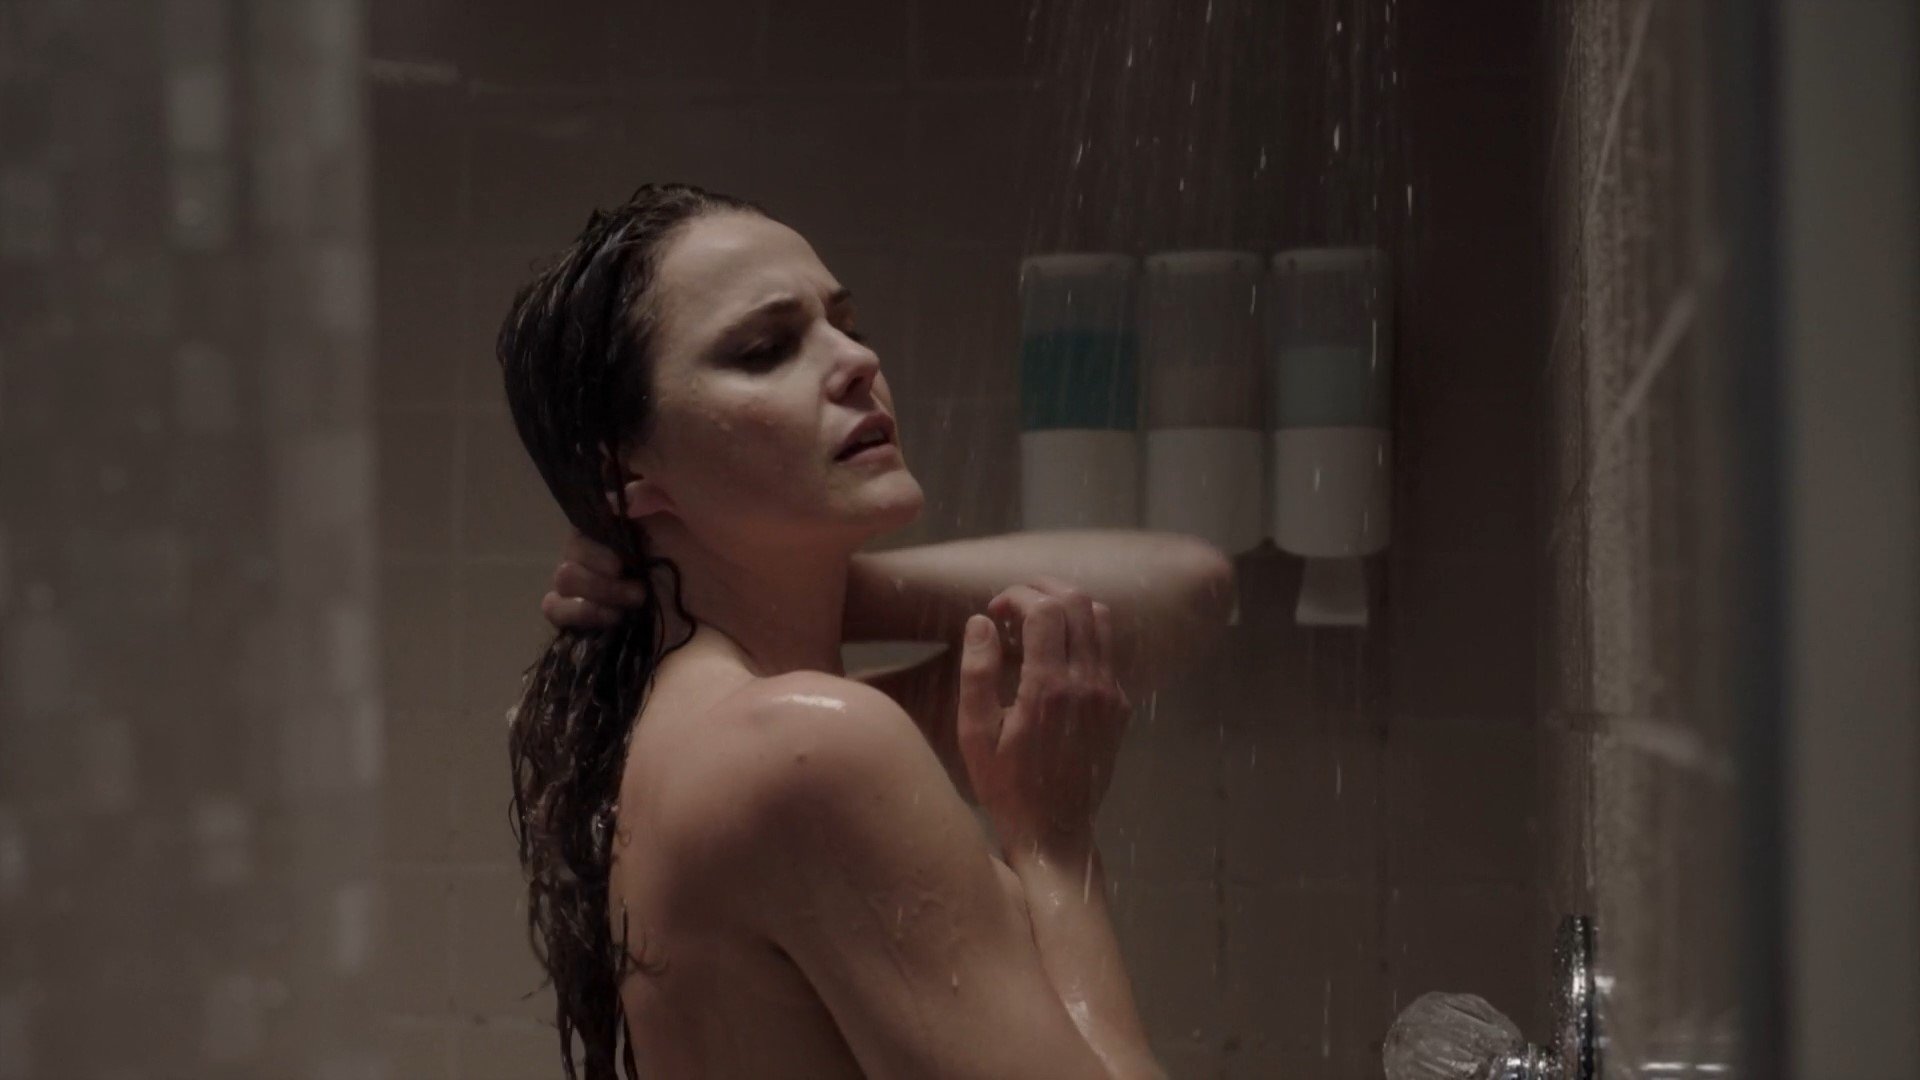 Keri Russell Nude -The Americans s05e02 (2017) - HD 1080p